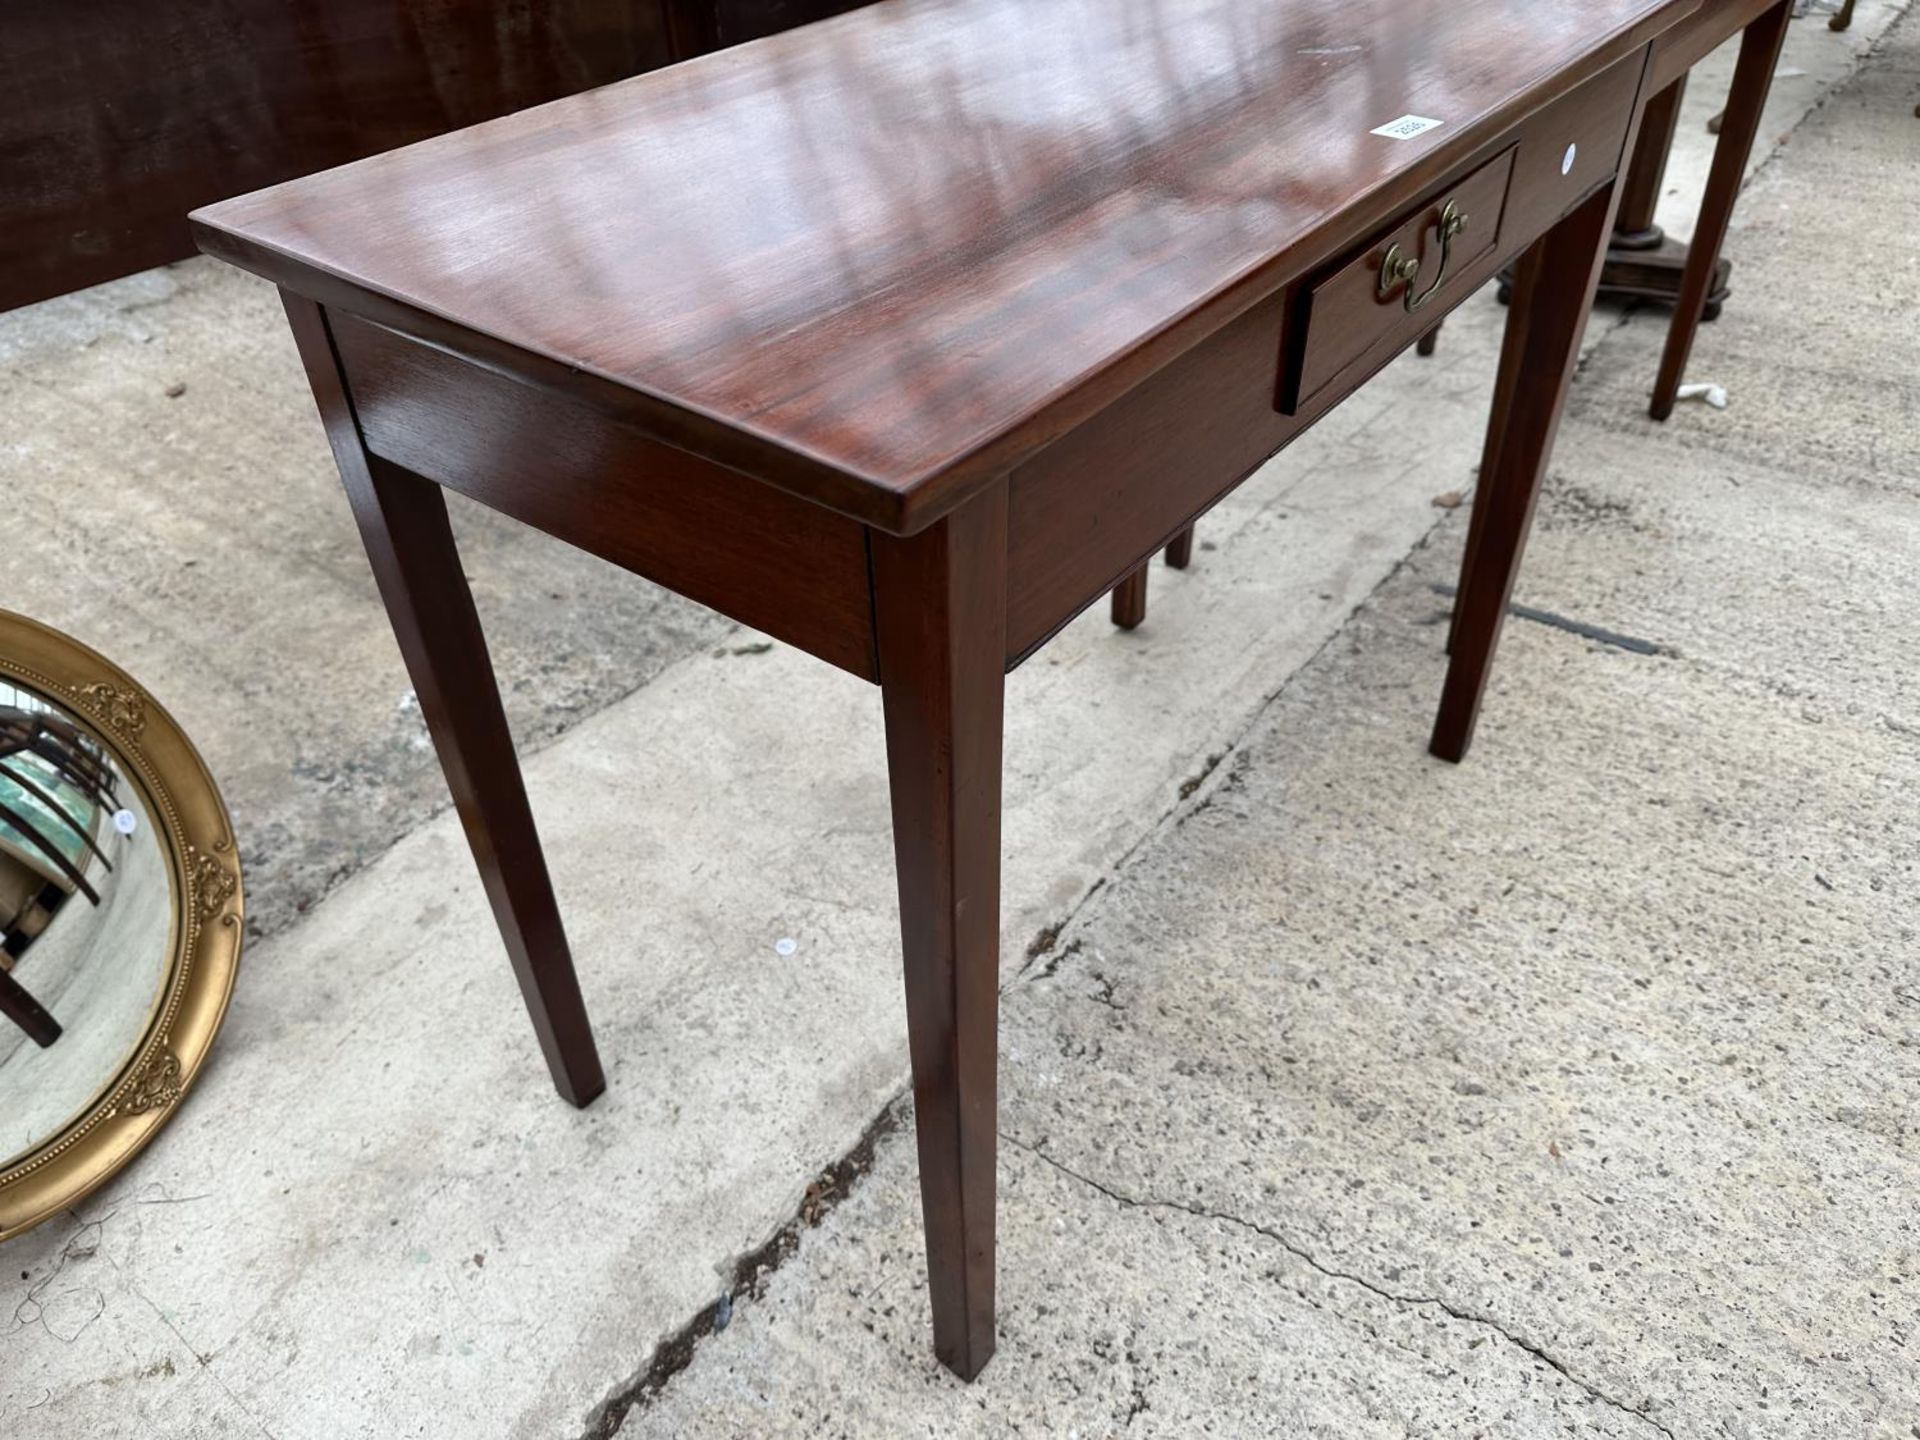 A 19TH CENTURY MAHOGANY SIDE TABLE WITH SINGLE DRAWER OM TAPERING LEGS, 35.5" WIDE - Image 3 of 3